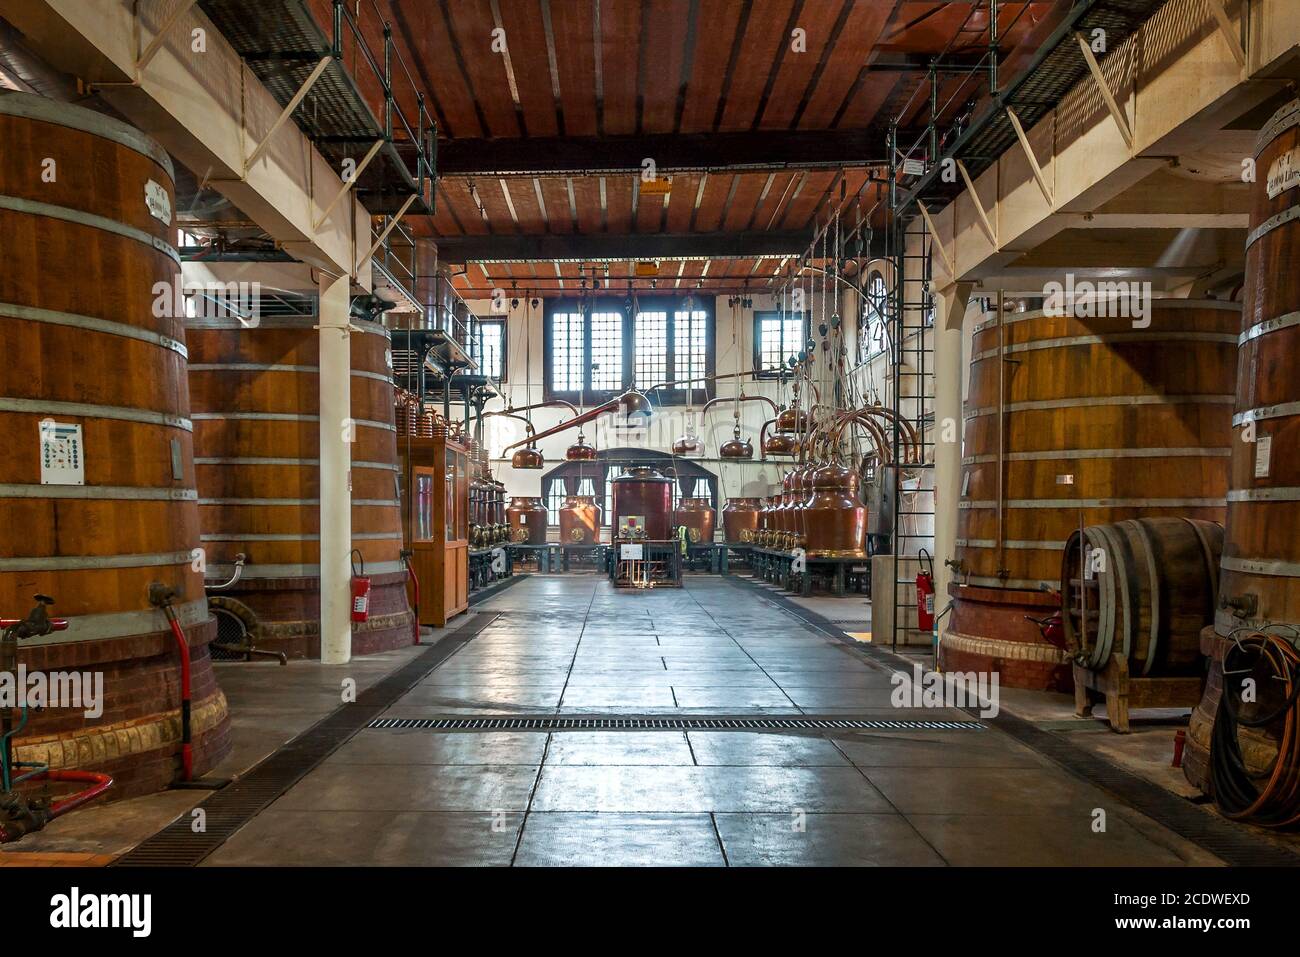 Distilling plants and barrels for the maturation of the spirits of the Palais Bénédictine Stock Photo